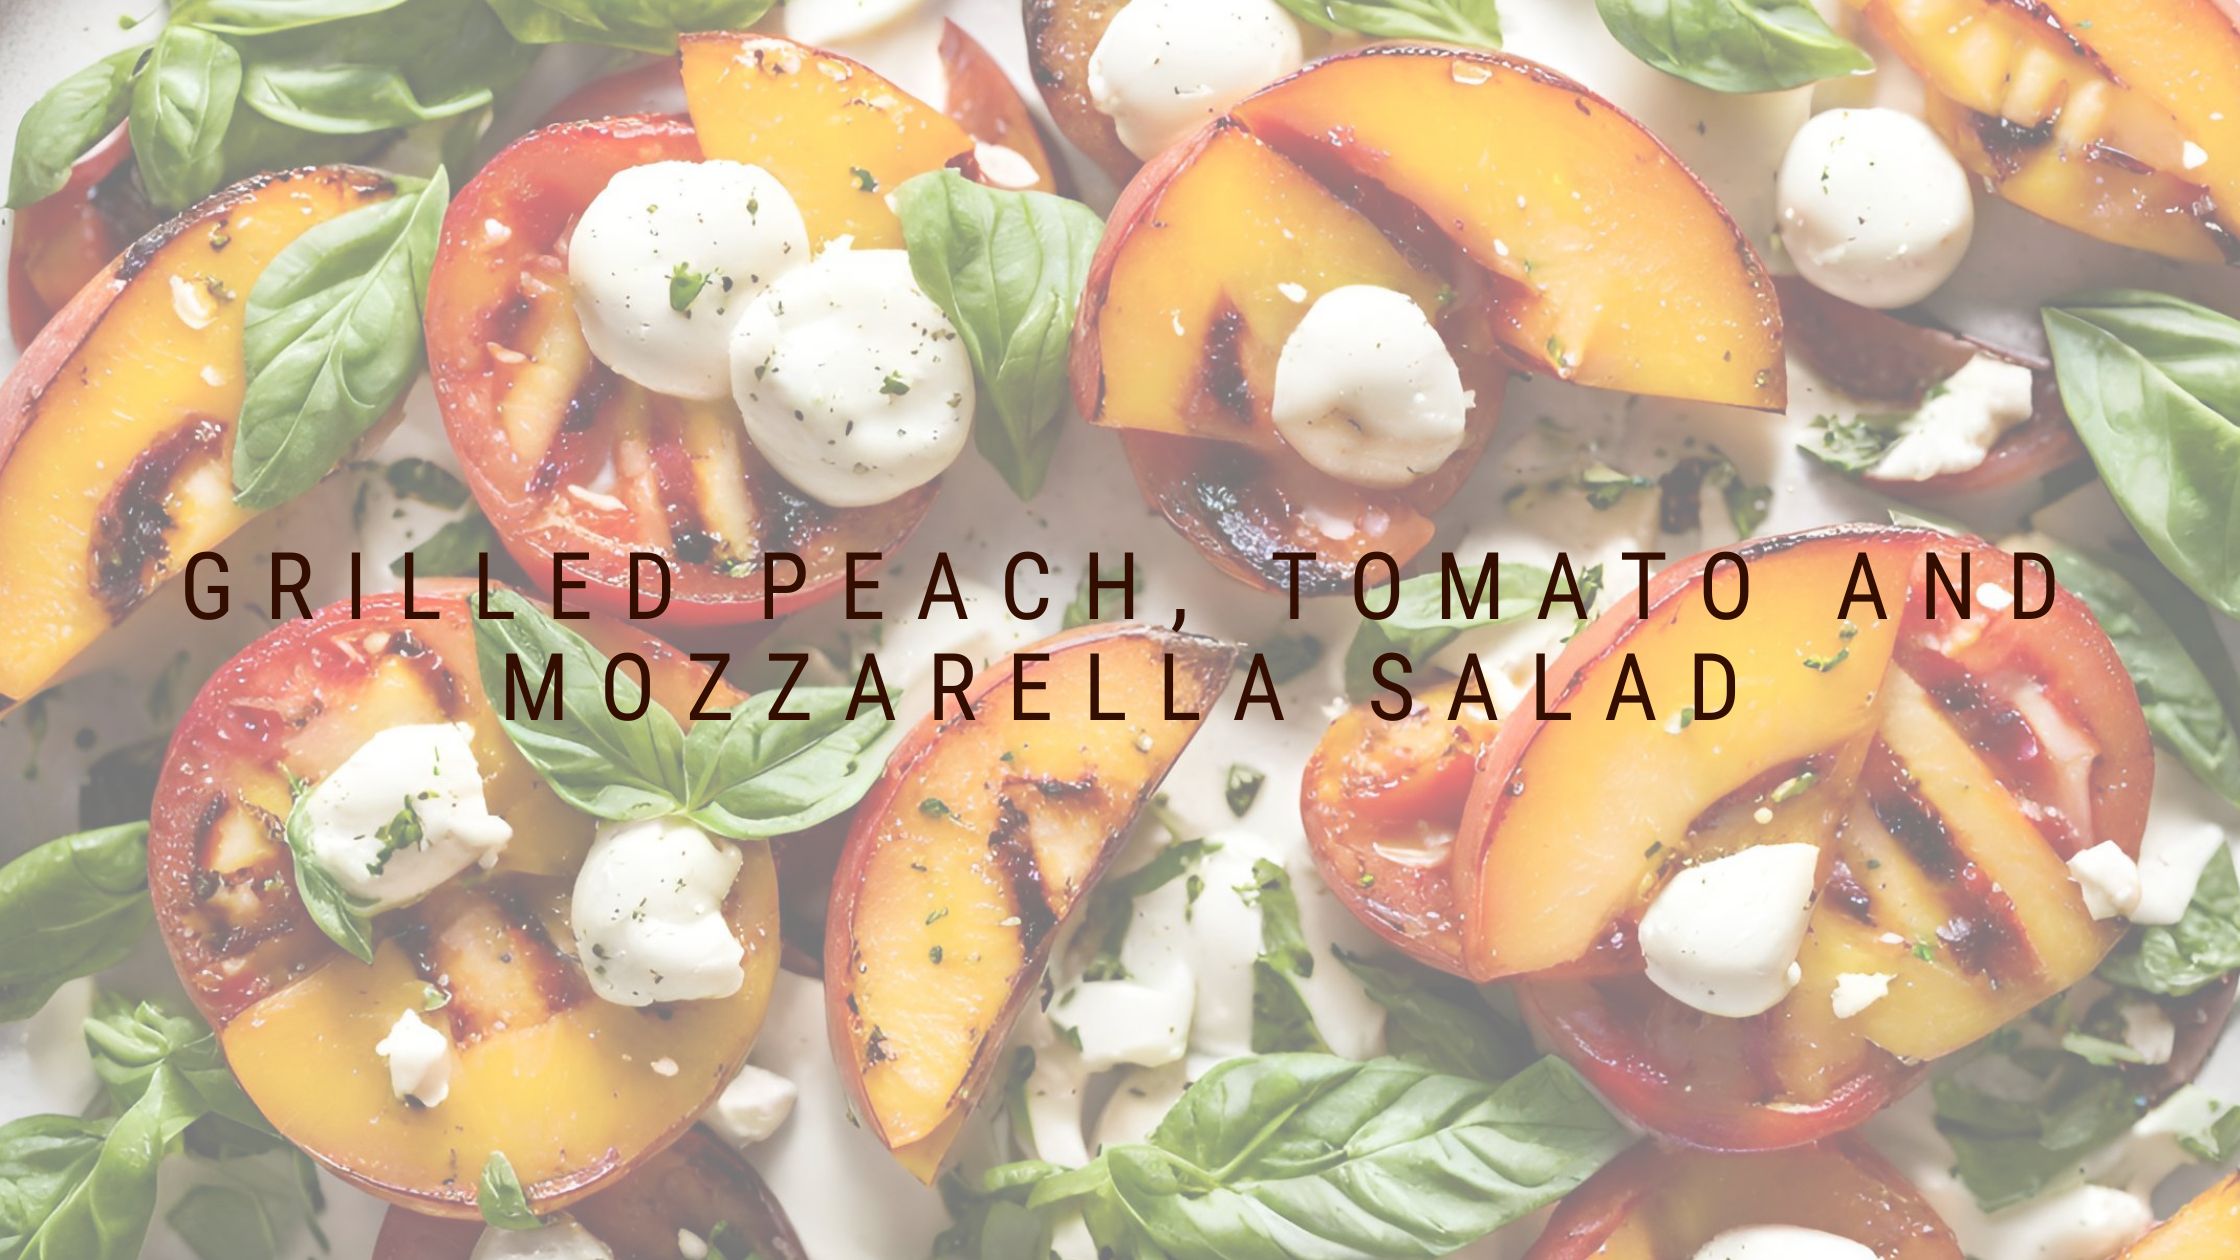 Peach season is almost over – Make Grilled Peach Salad now!